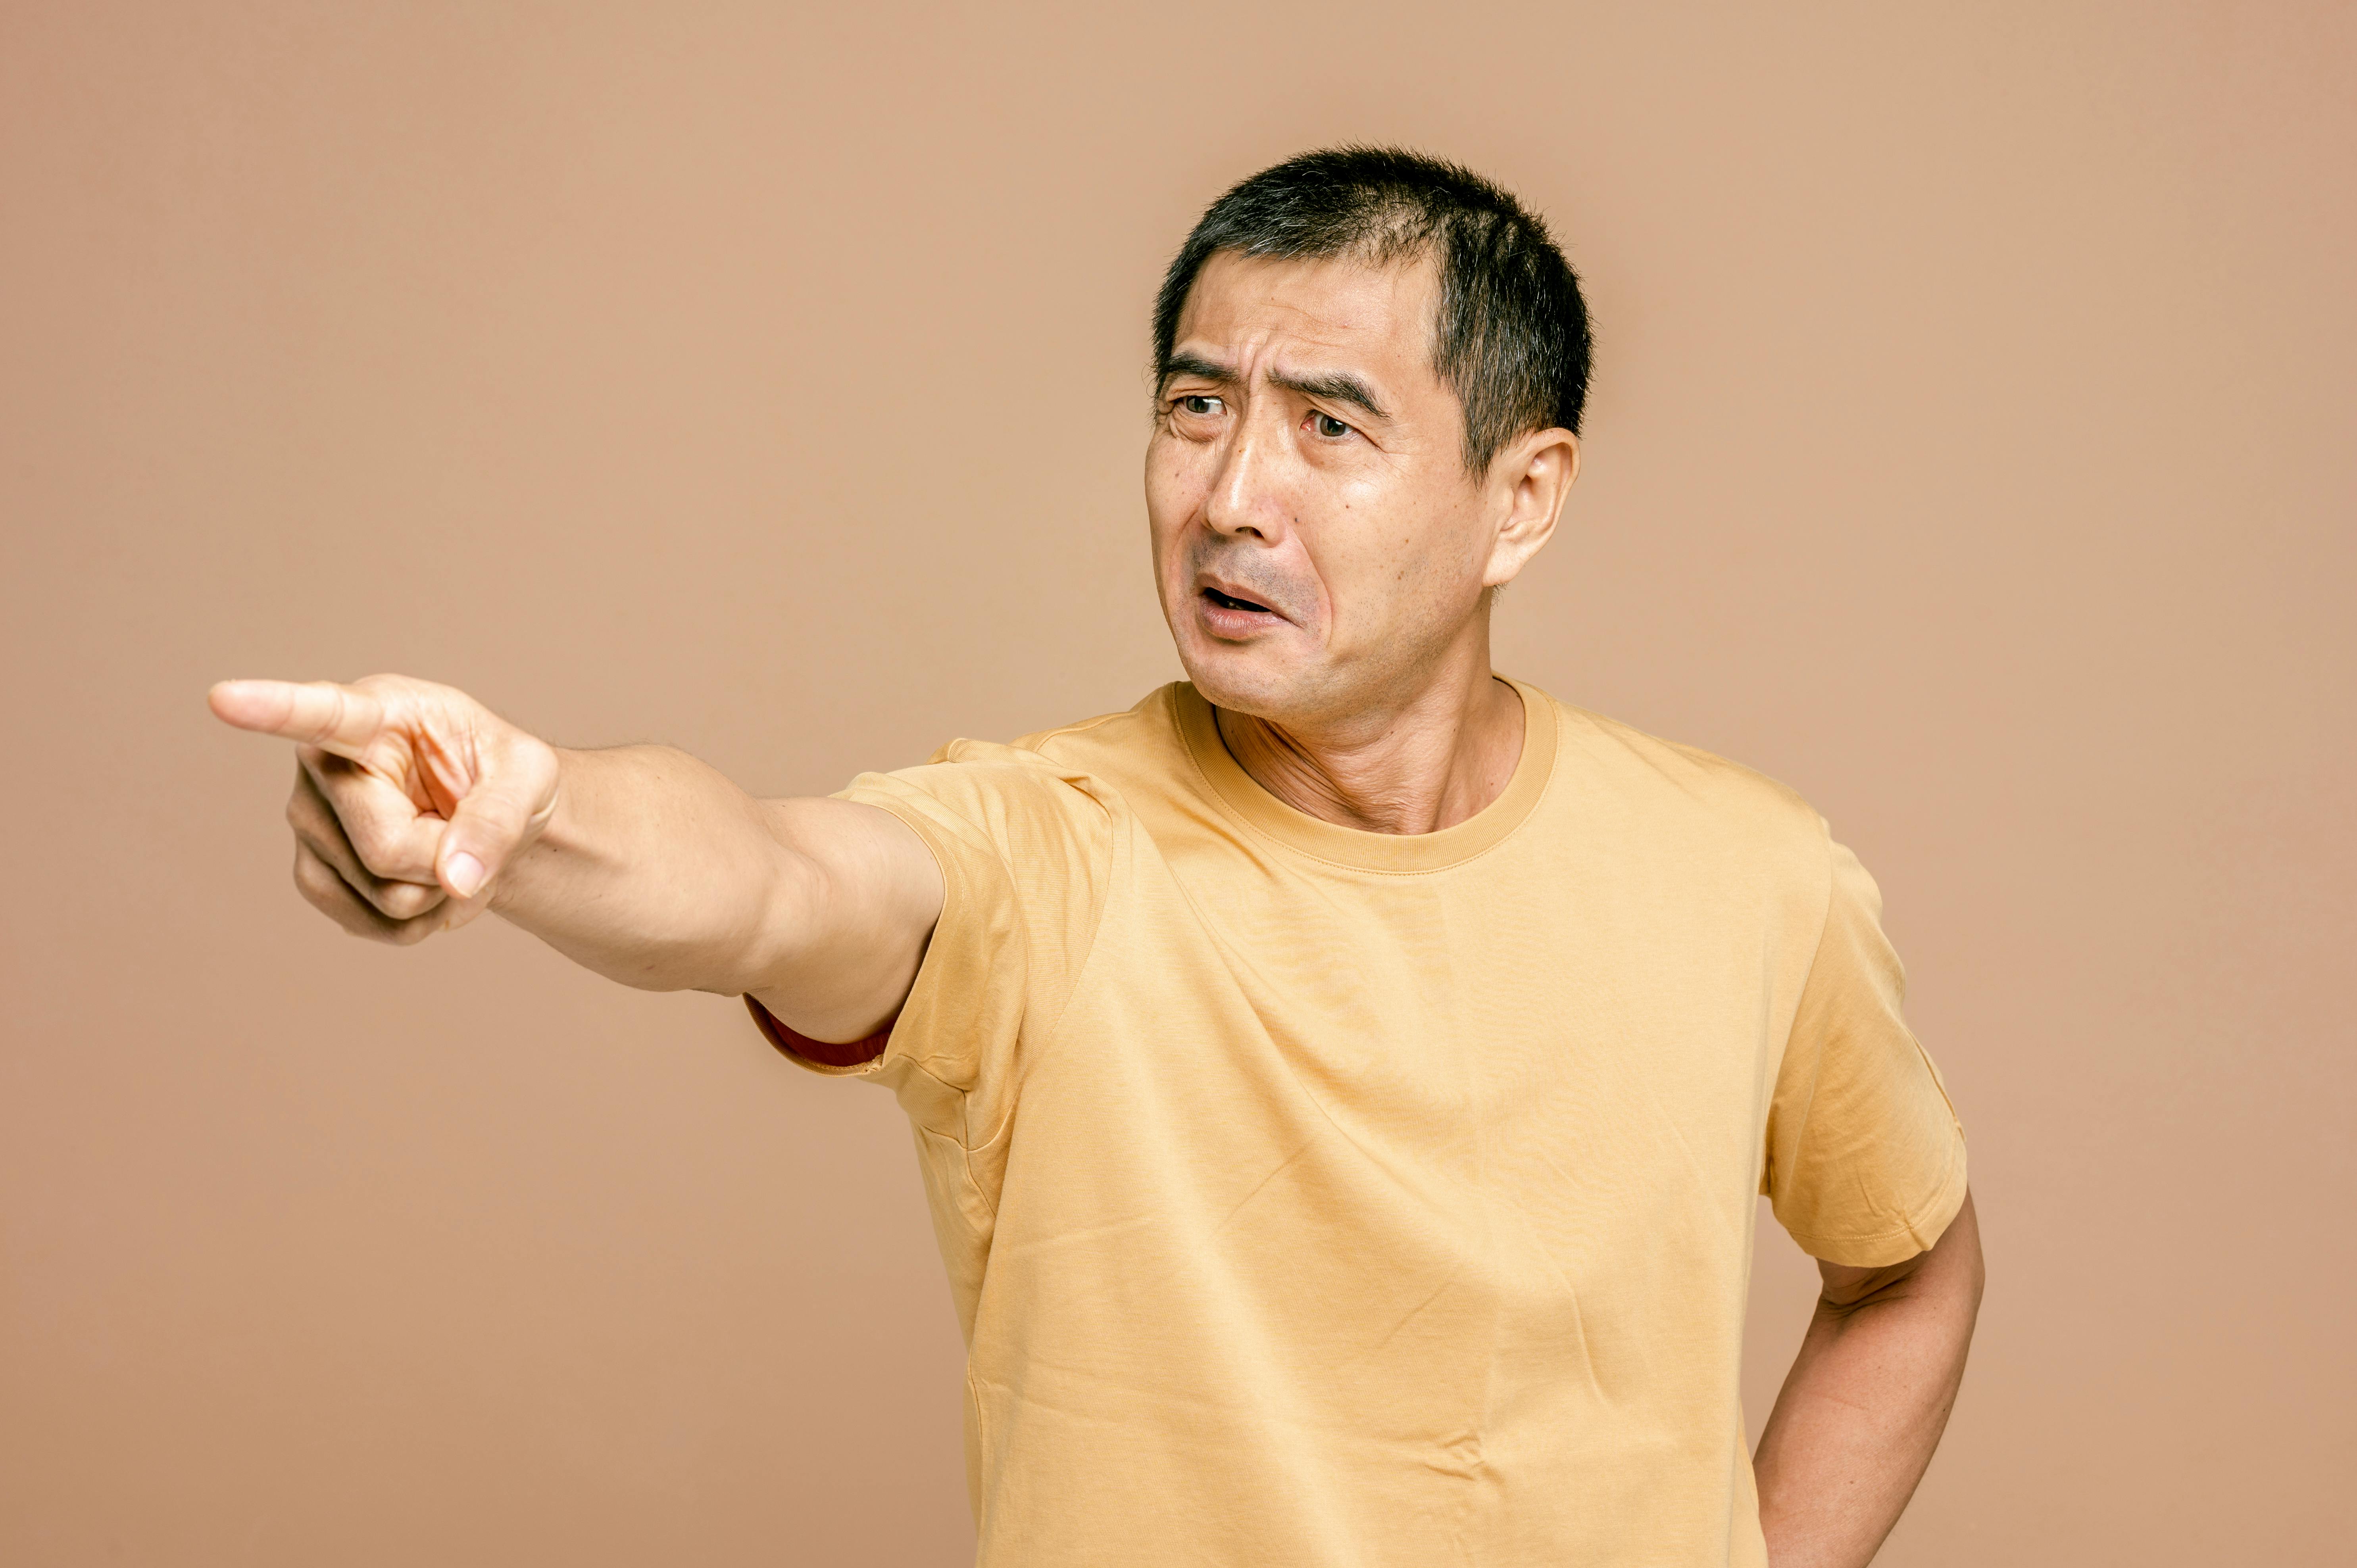 An upset man pointing a finger while reacting to something | Source: Pexels